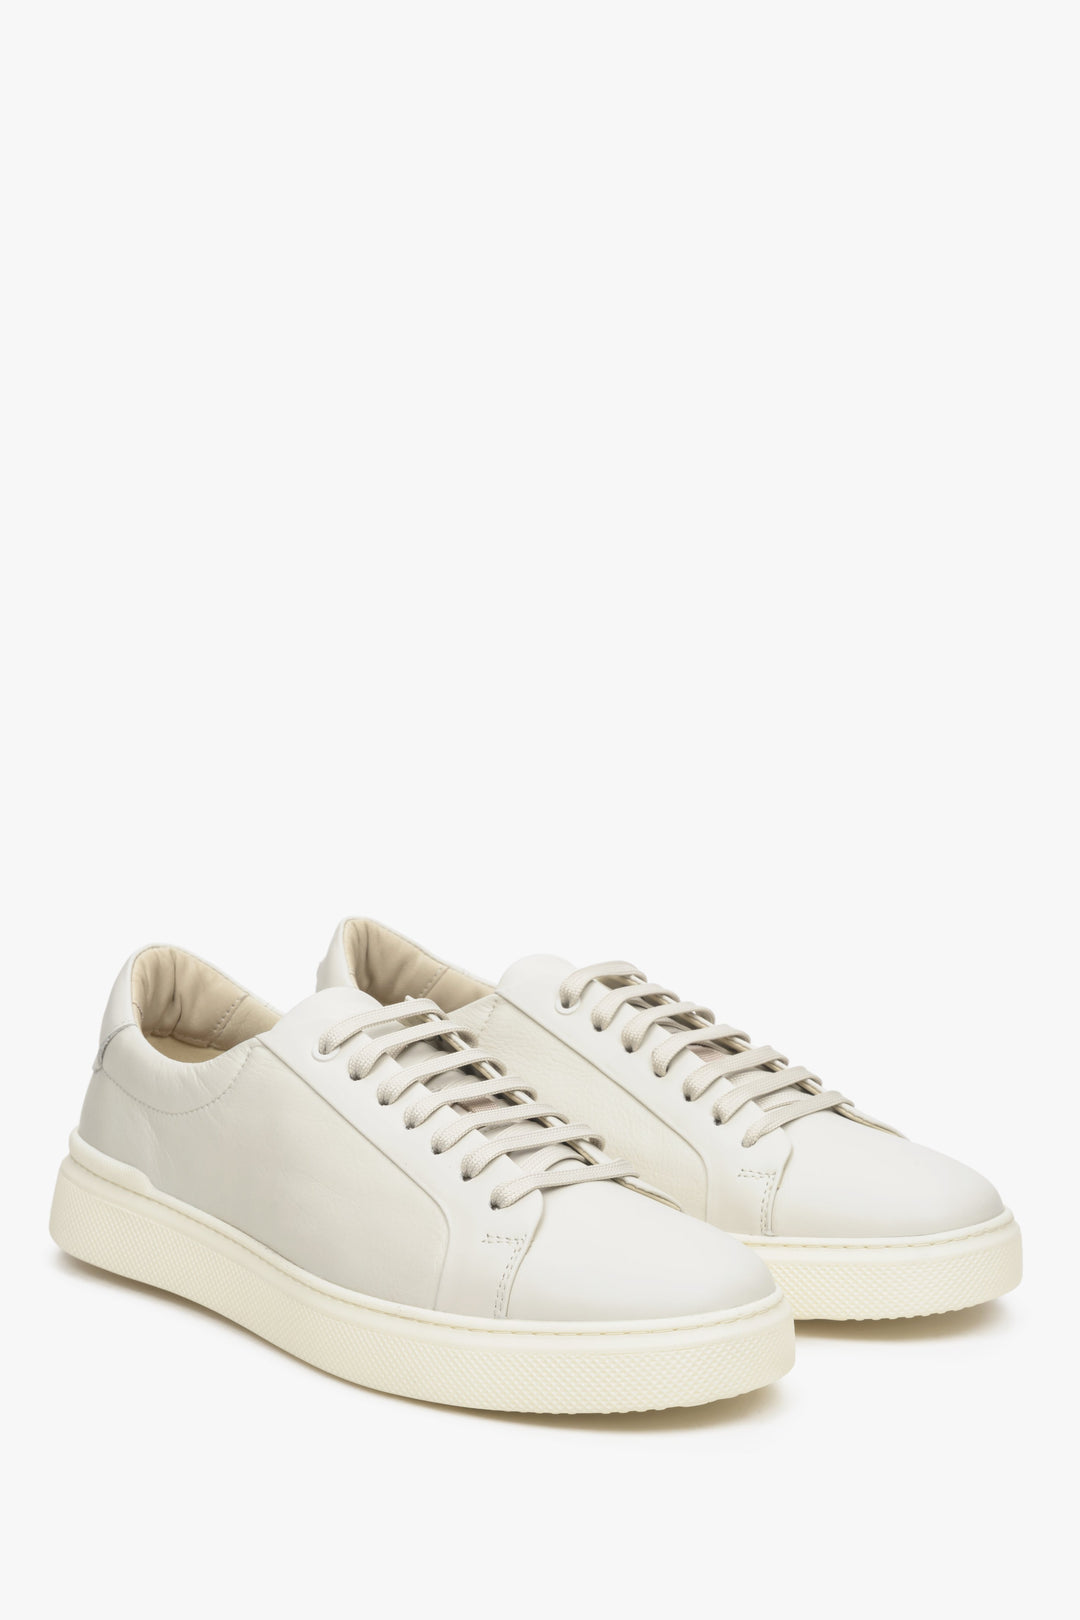 Men's light beige sneakers made of genuine leather with laces - presentation of the side seam and toe.